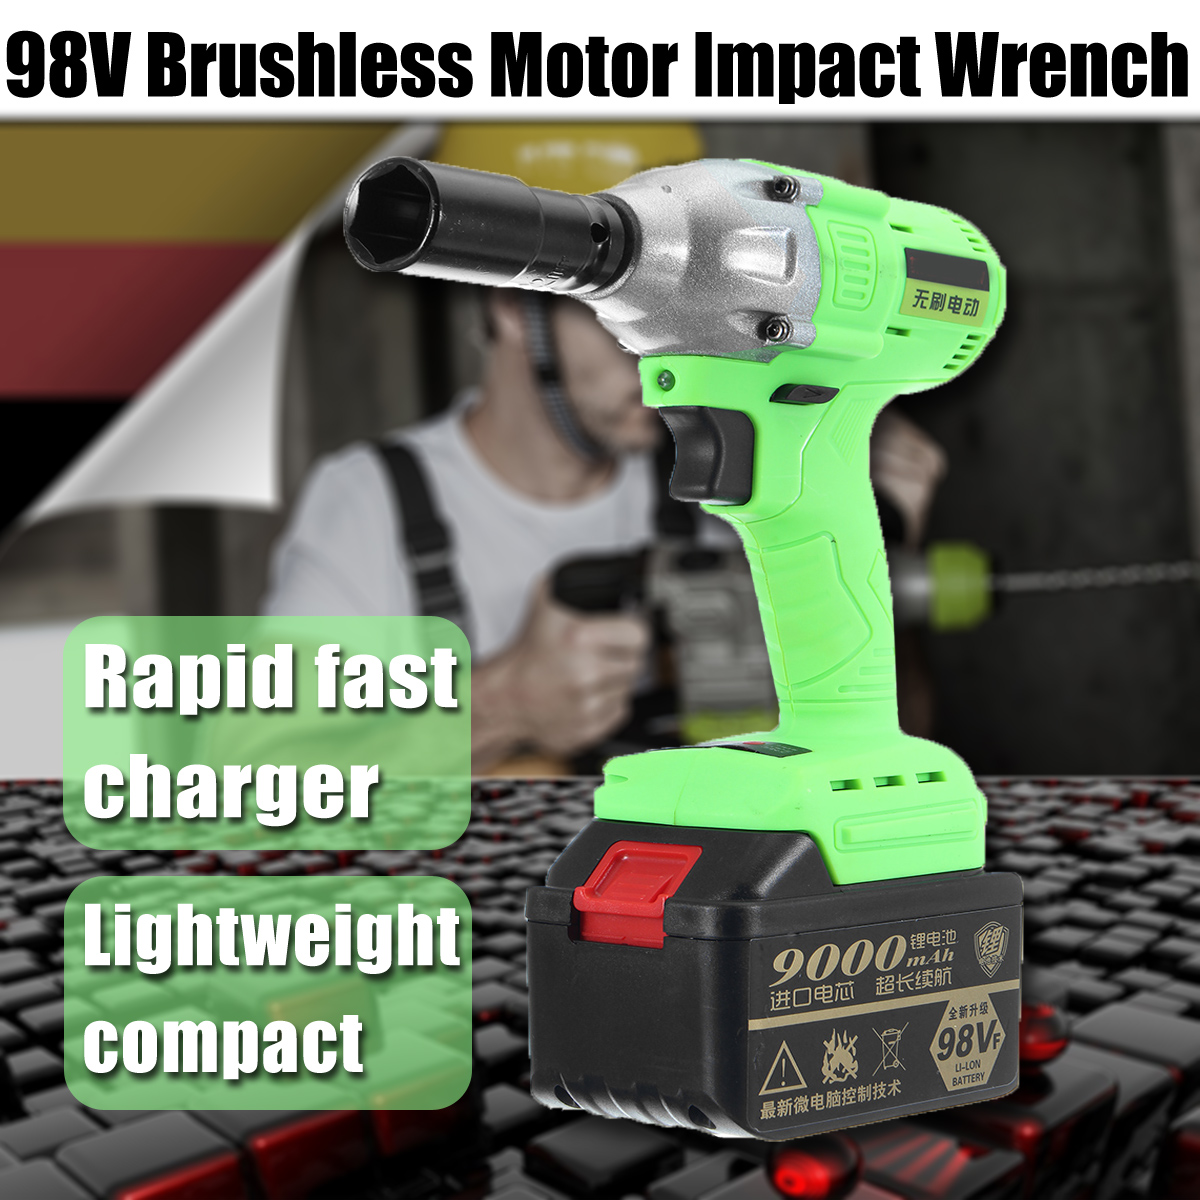 98V-9000mAh-Cordless-Lithium-Ion-Electric-Impact-Wrench-Power-Wrenche-Brushless-Motor-1270466-1